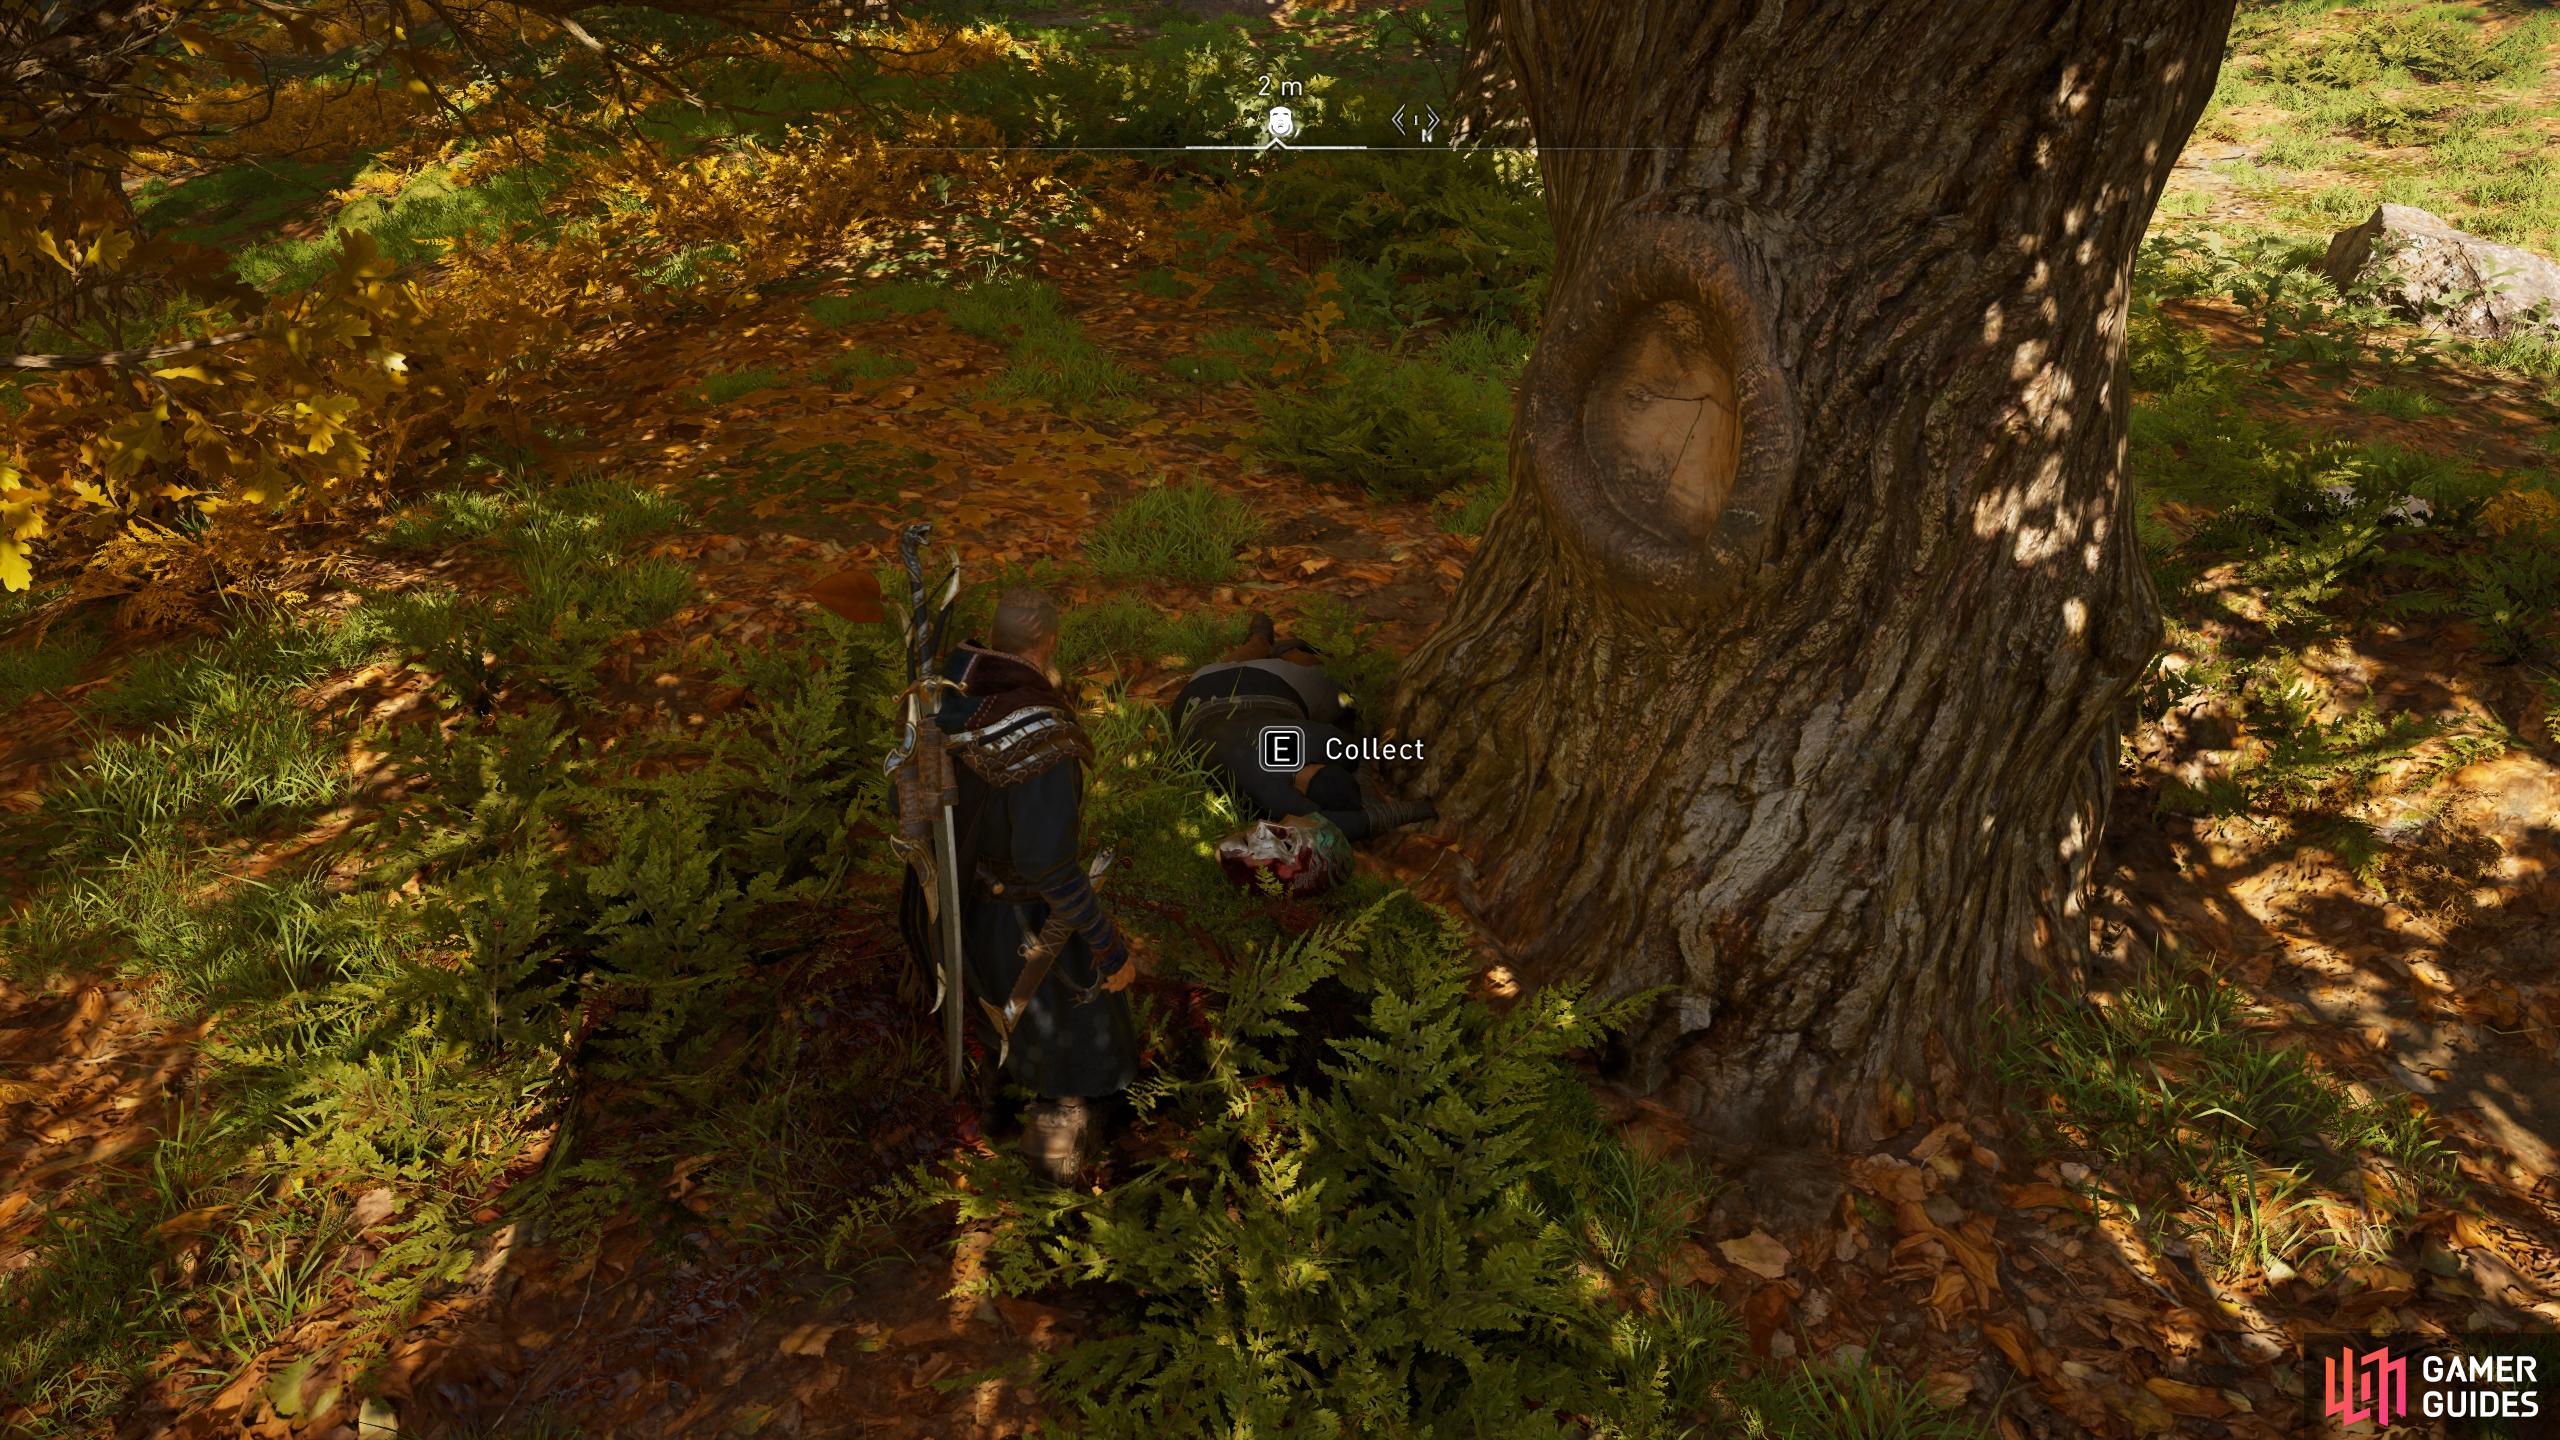 You'll be able to loot the artifact from the ground, lying beneath a tree.